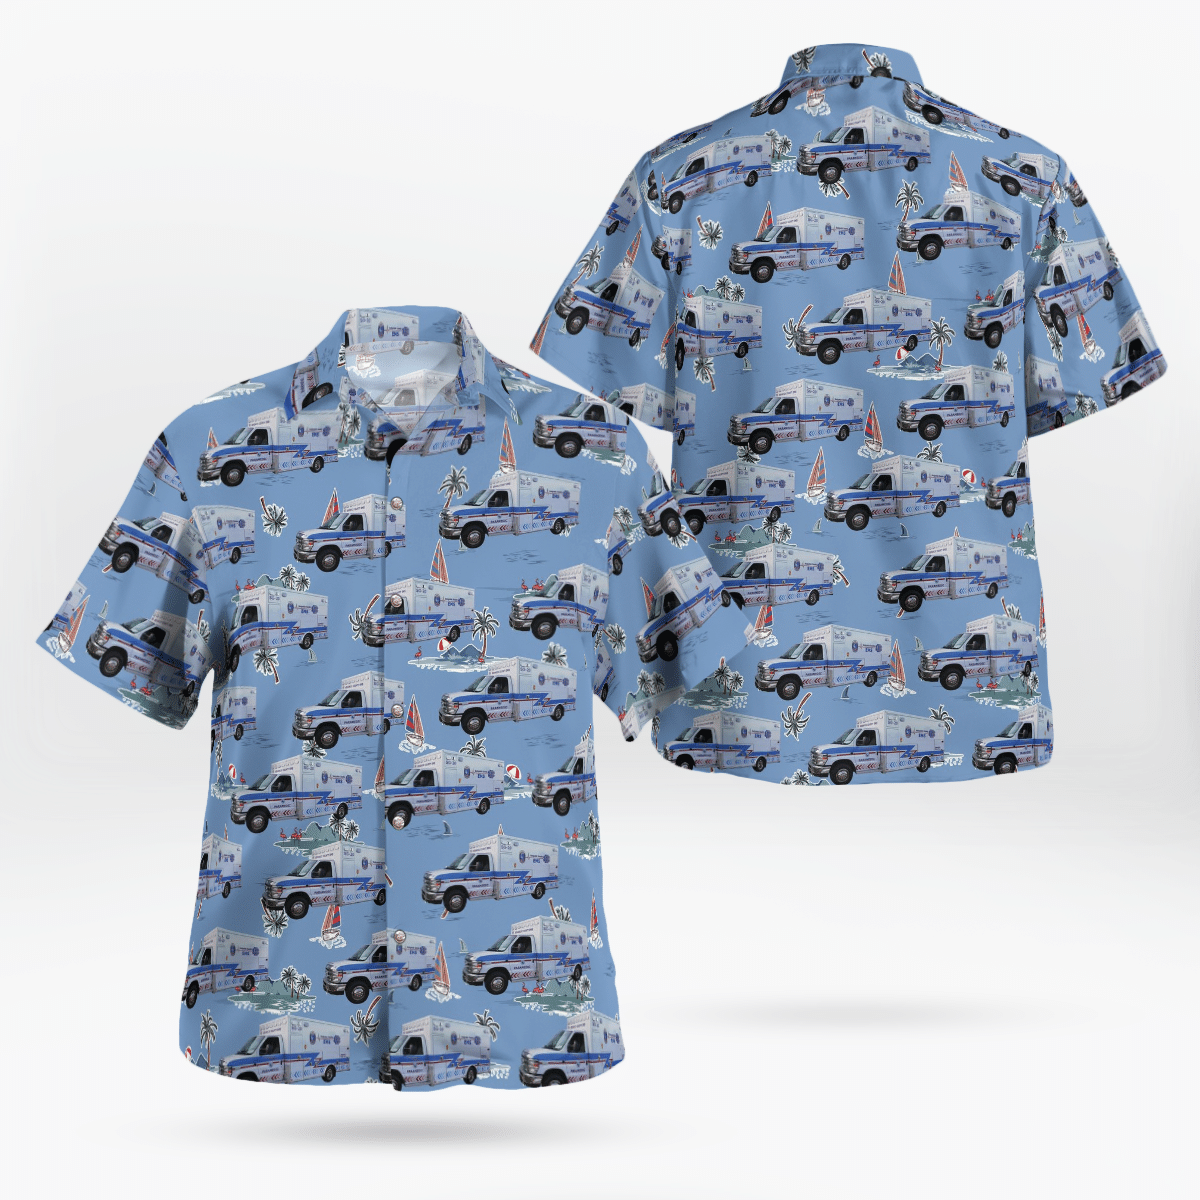 Consider getting these Hawaiian Shirt for your friends 347